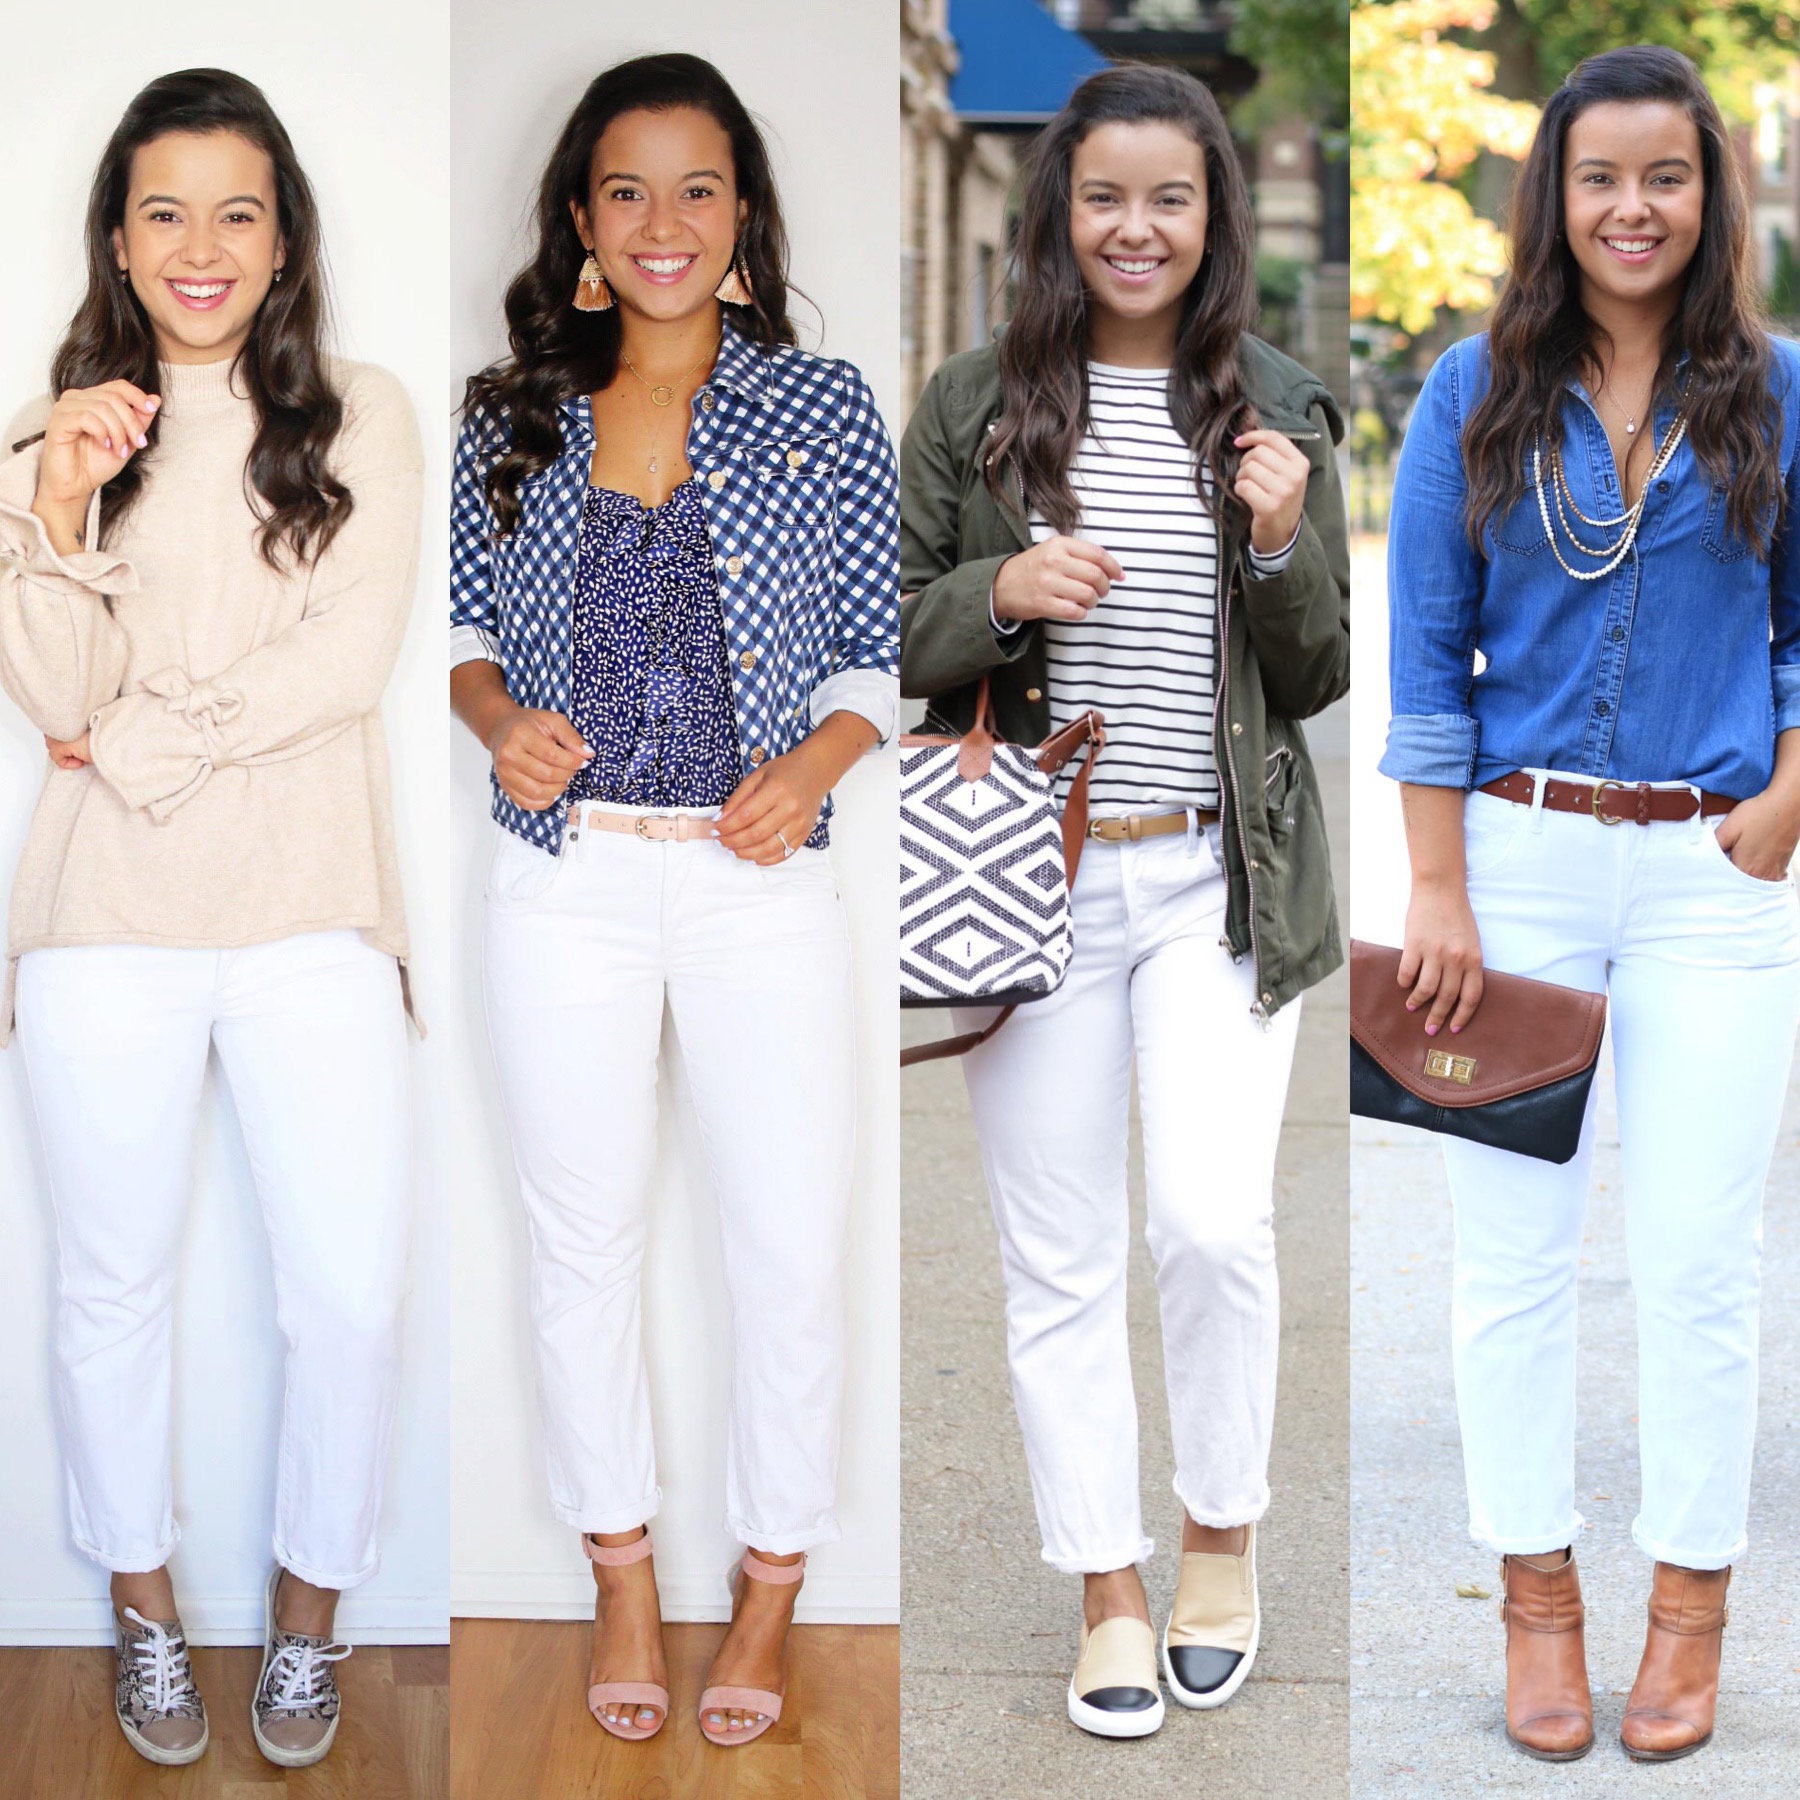 Le Fashion: This Outfit Made Us Want To Break Out The White Denim